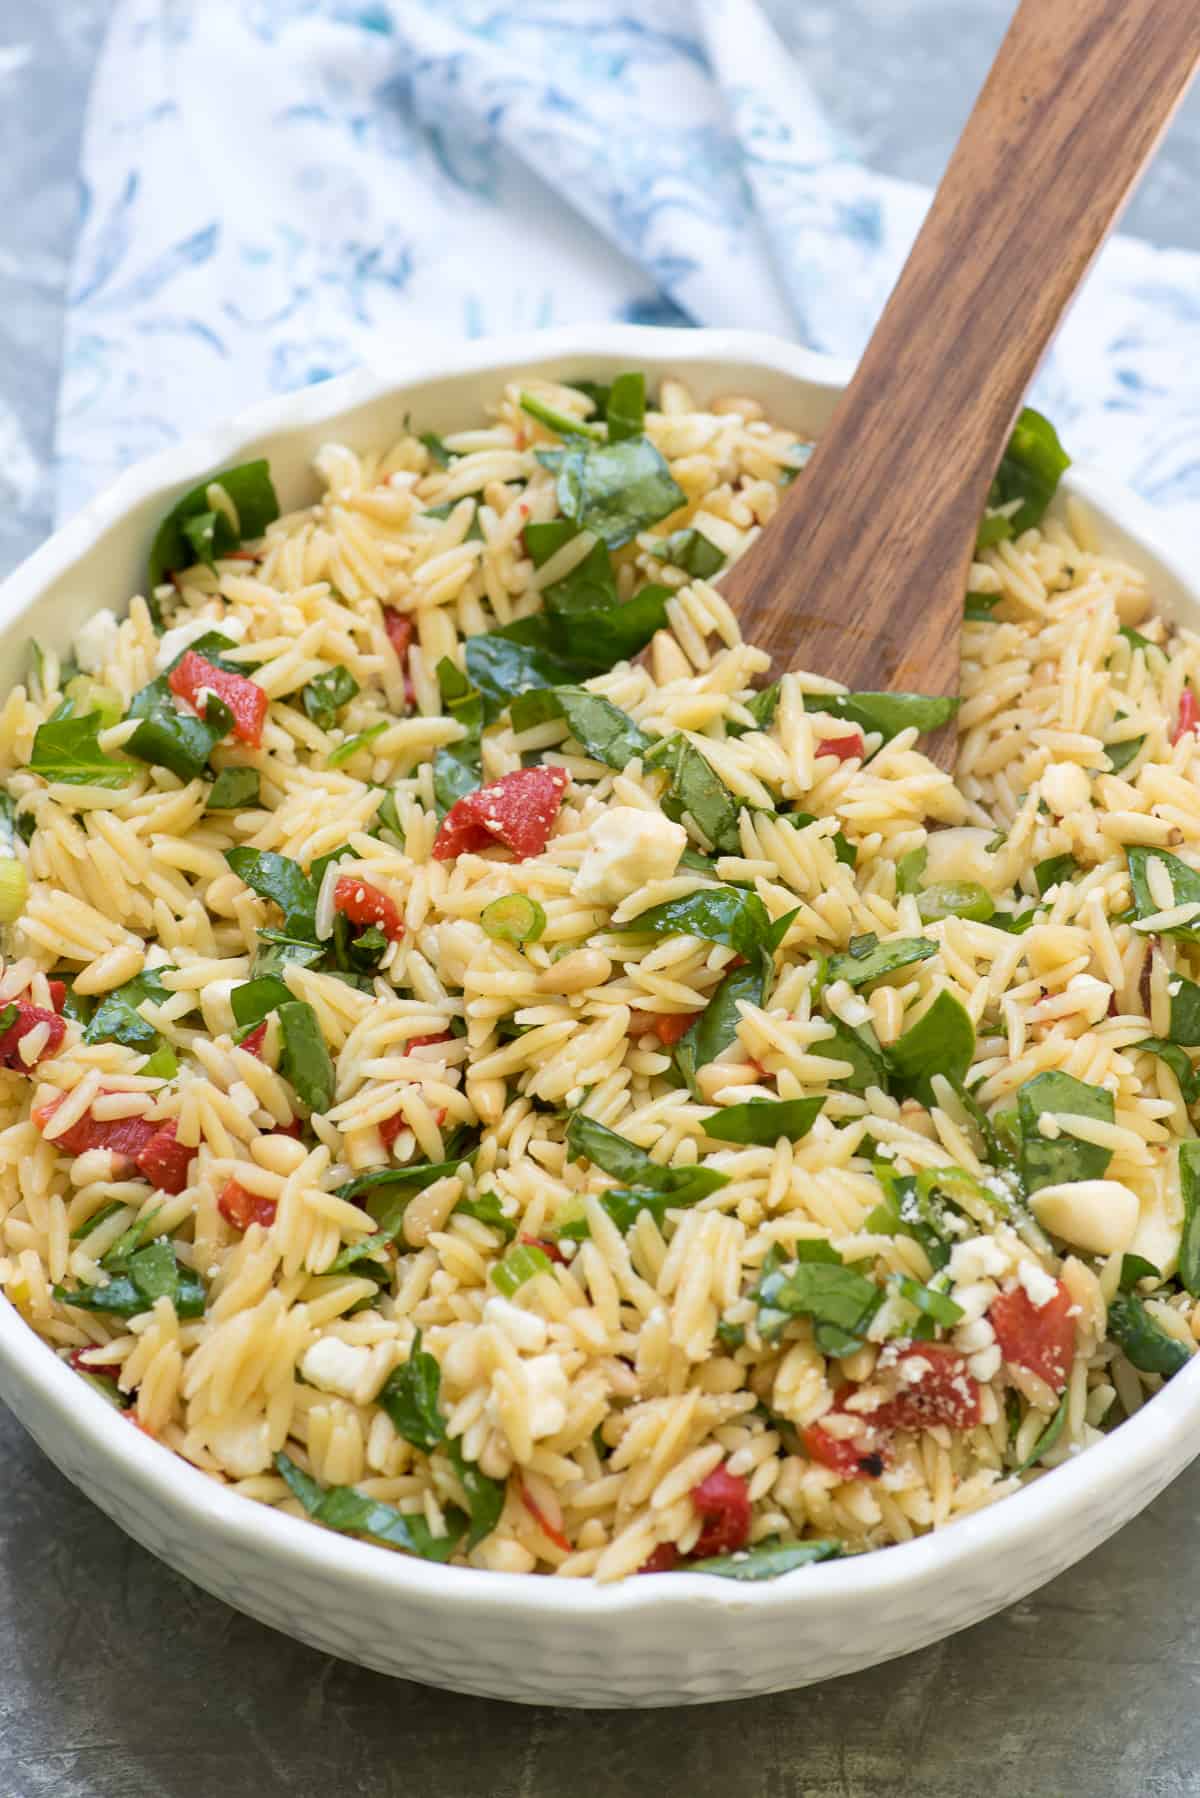 A wooden serving spoon resting in a bowl of orzo salad.